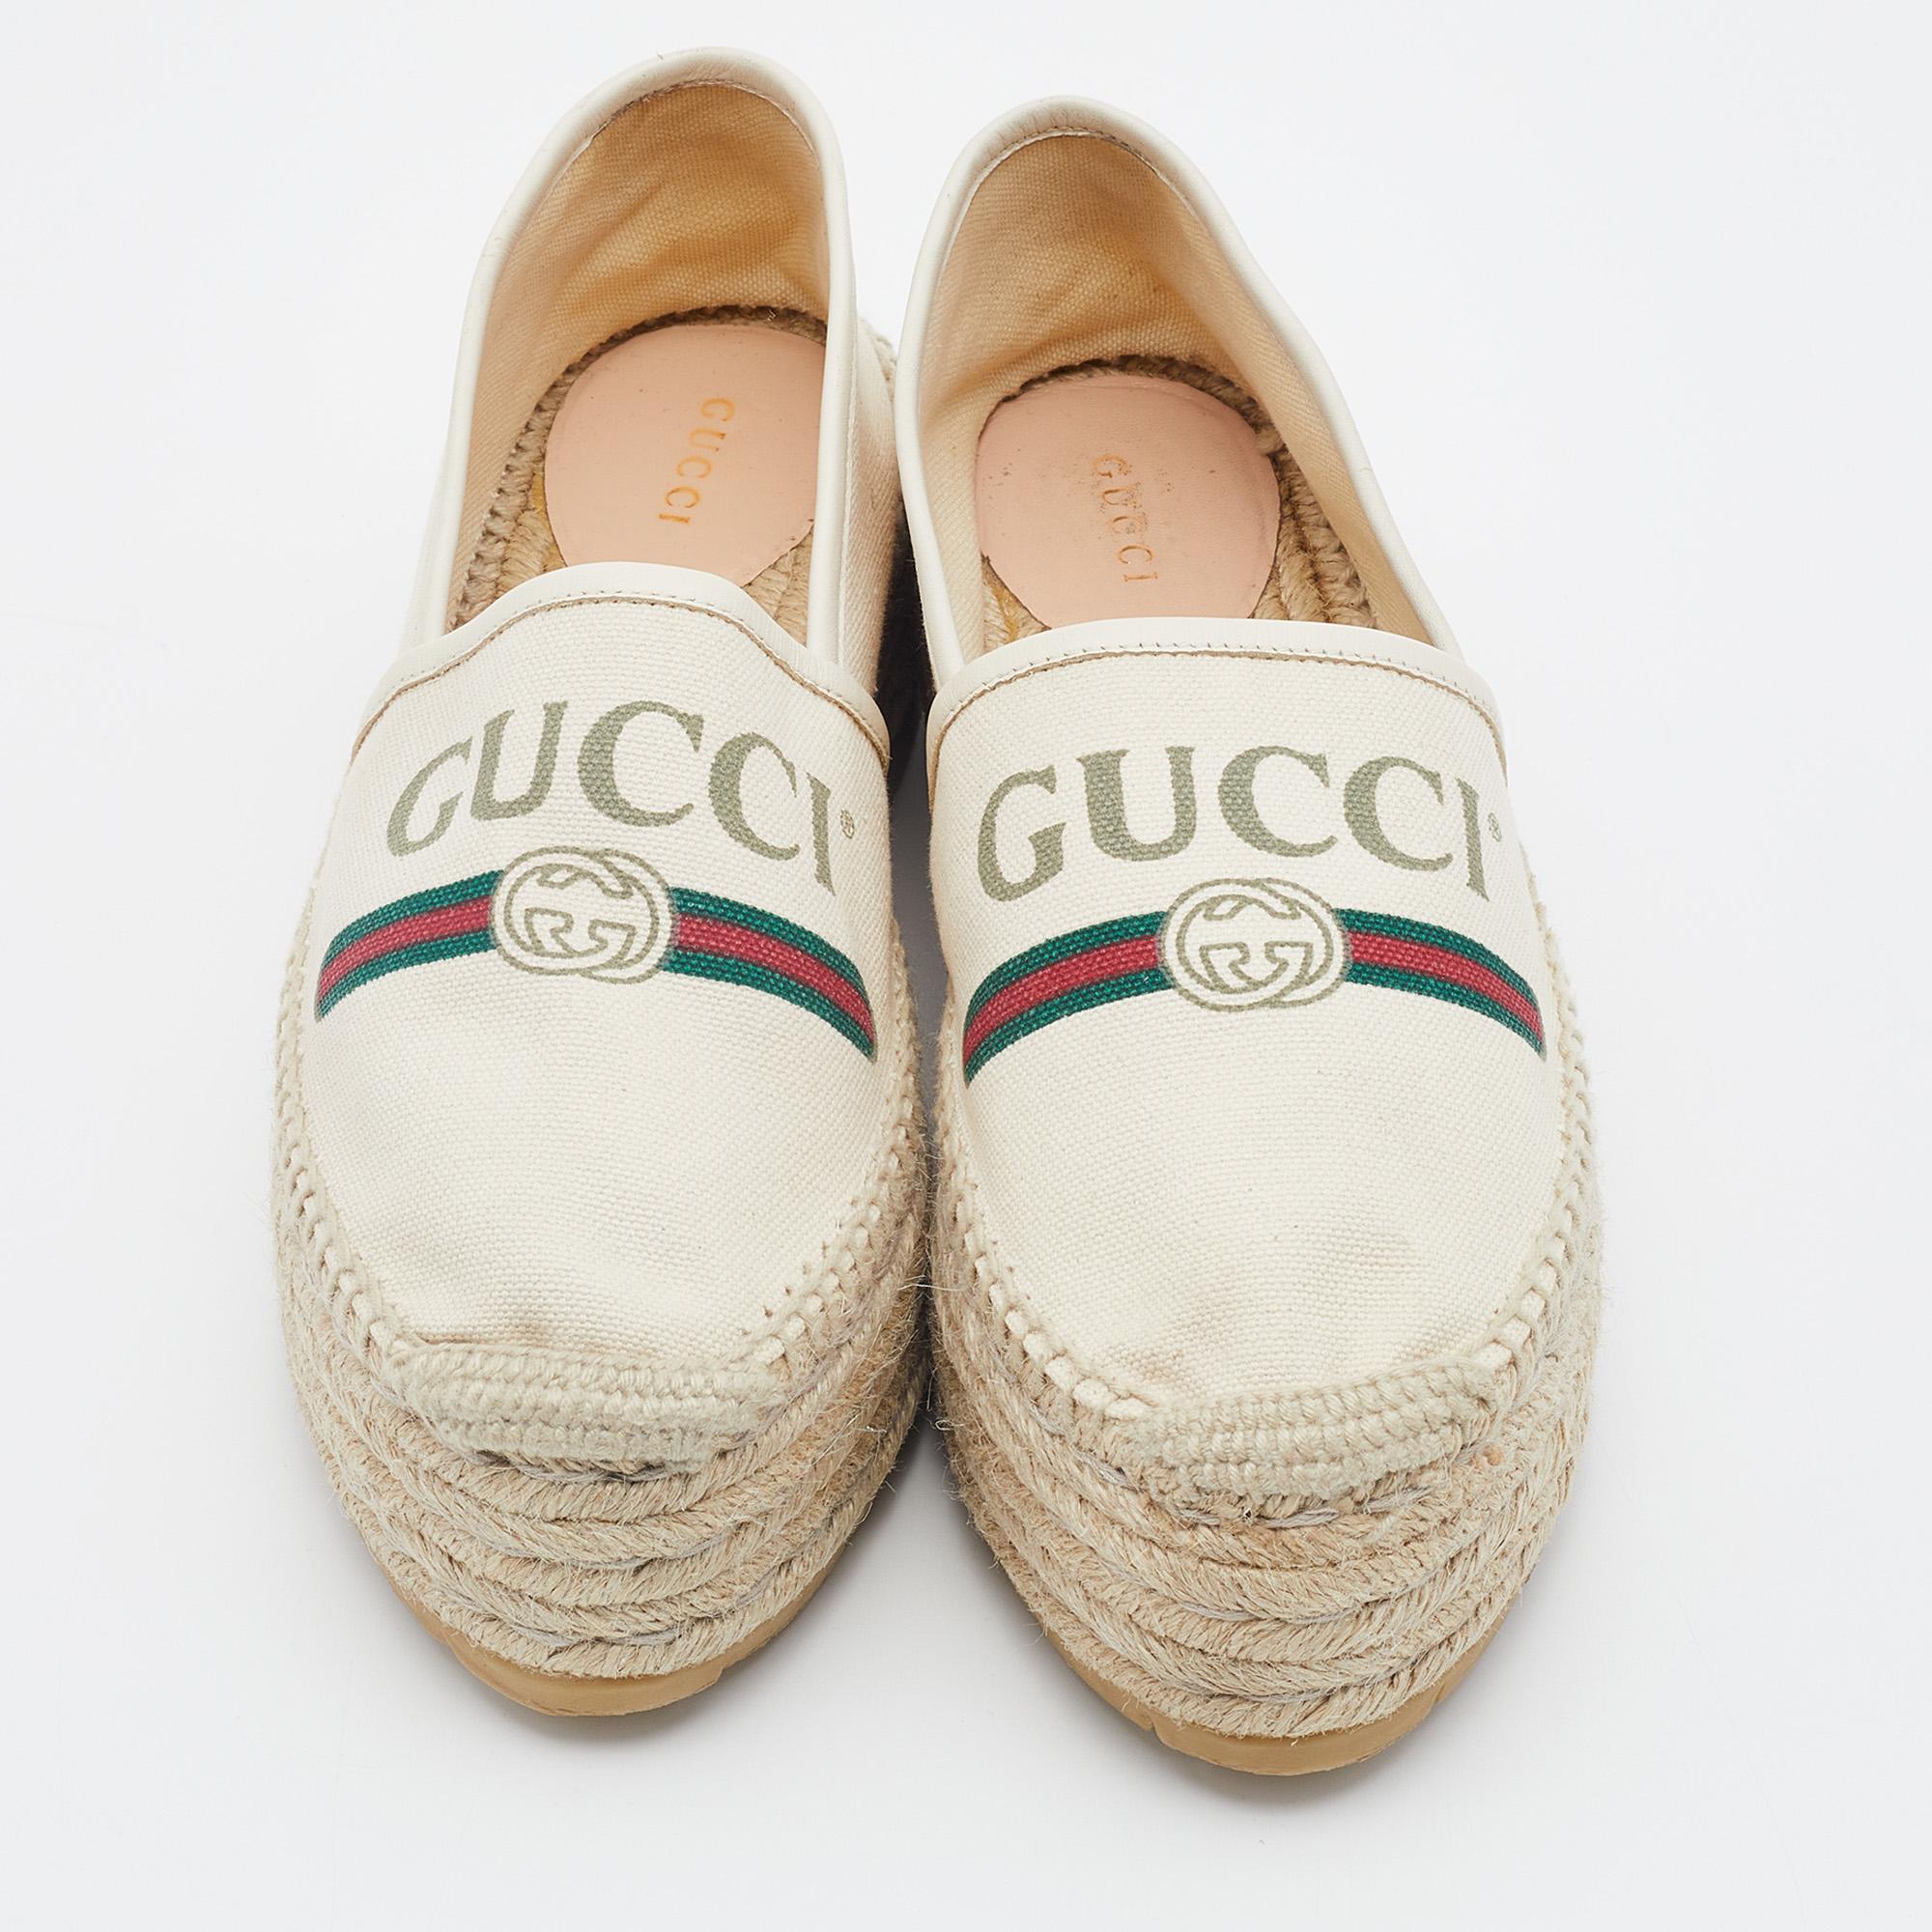 Step out in style and make others go gaga over these chic espadrilles from Gucci! These beige espadrilles are crafted from canvas and leather trims and feature round toes. They have been detailed with a vintage brand logo and the signature web print